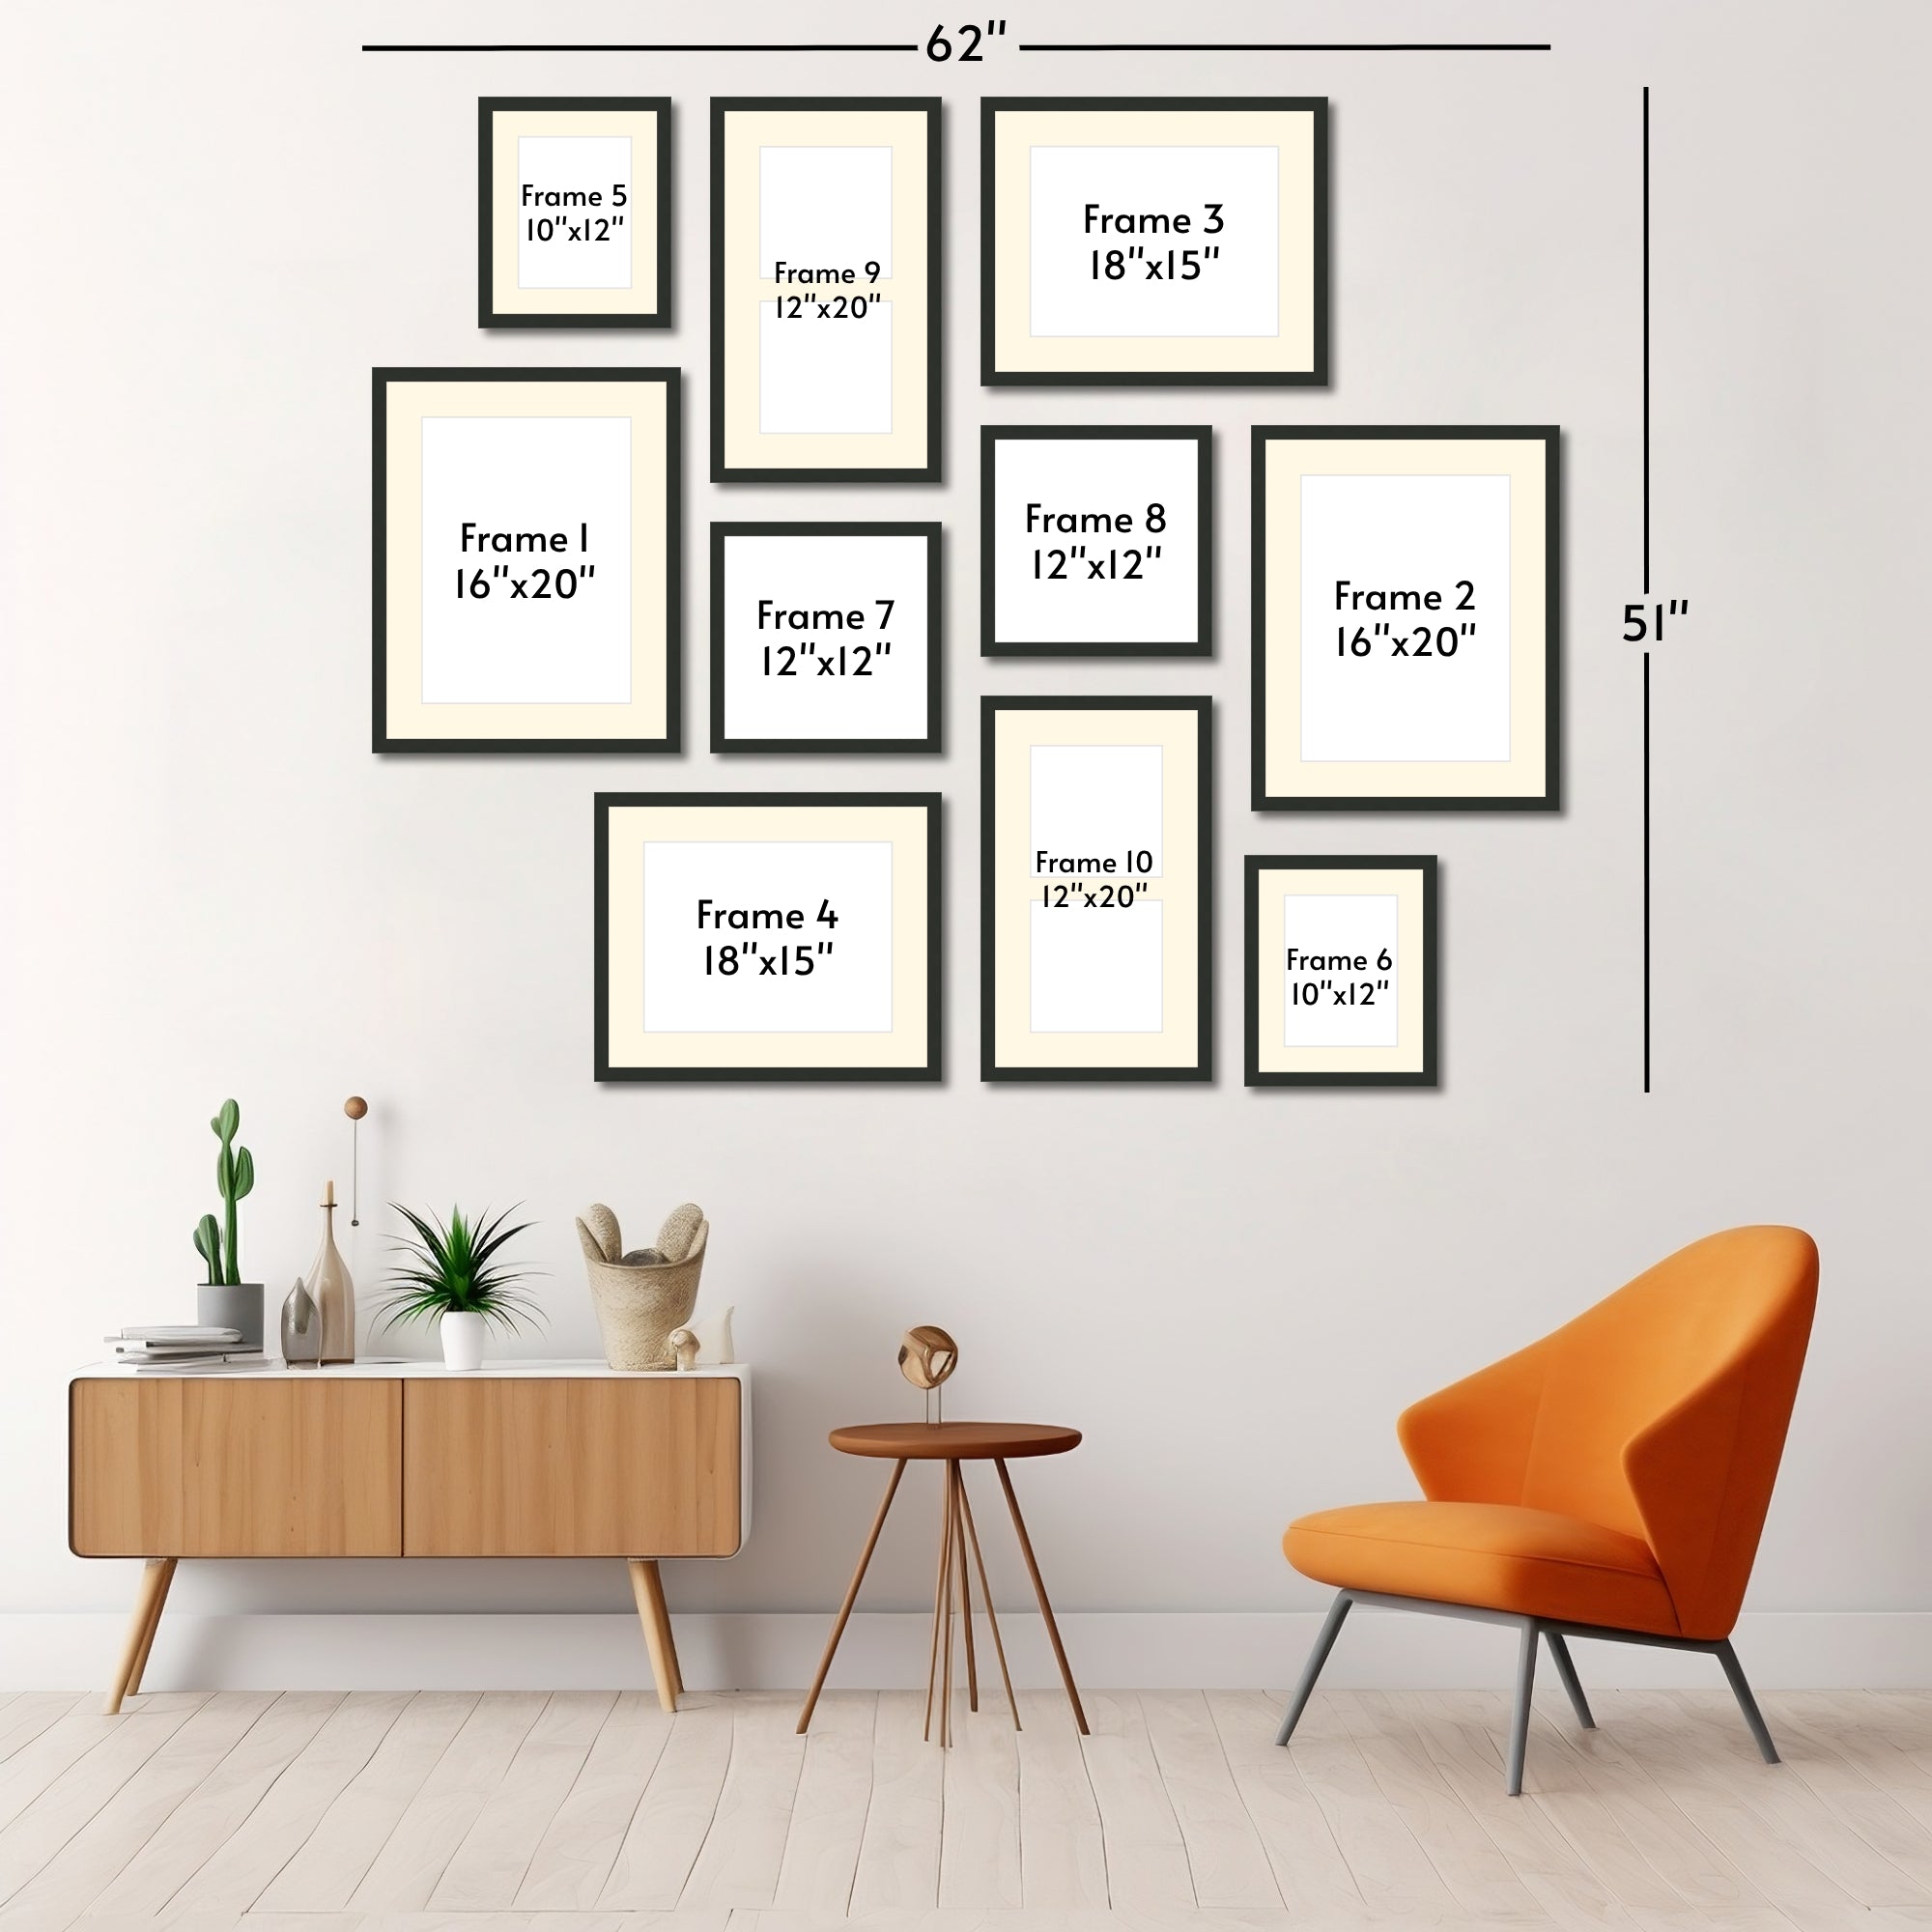 62" x 51" Gallery Wall Wooden Frame (Set of 10)